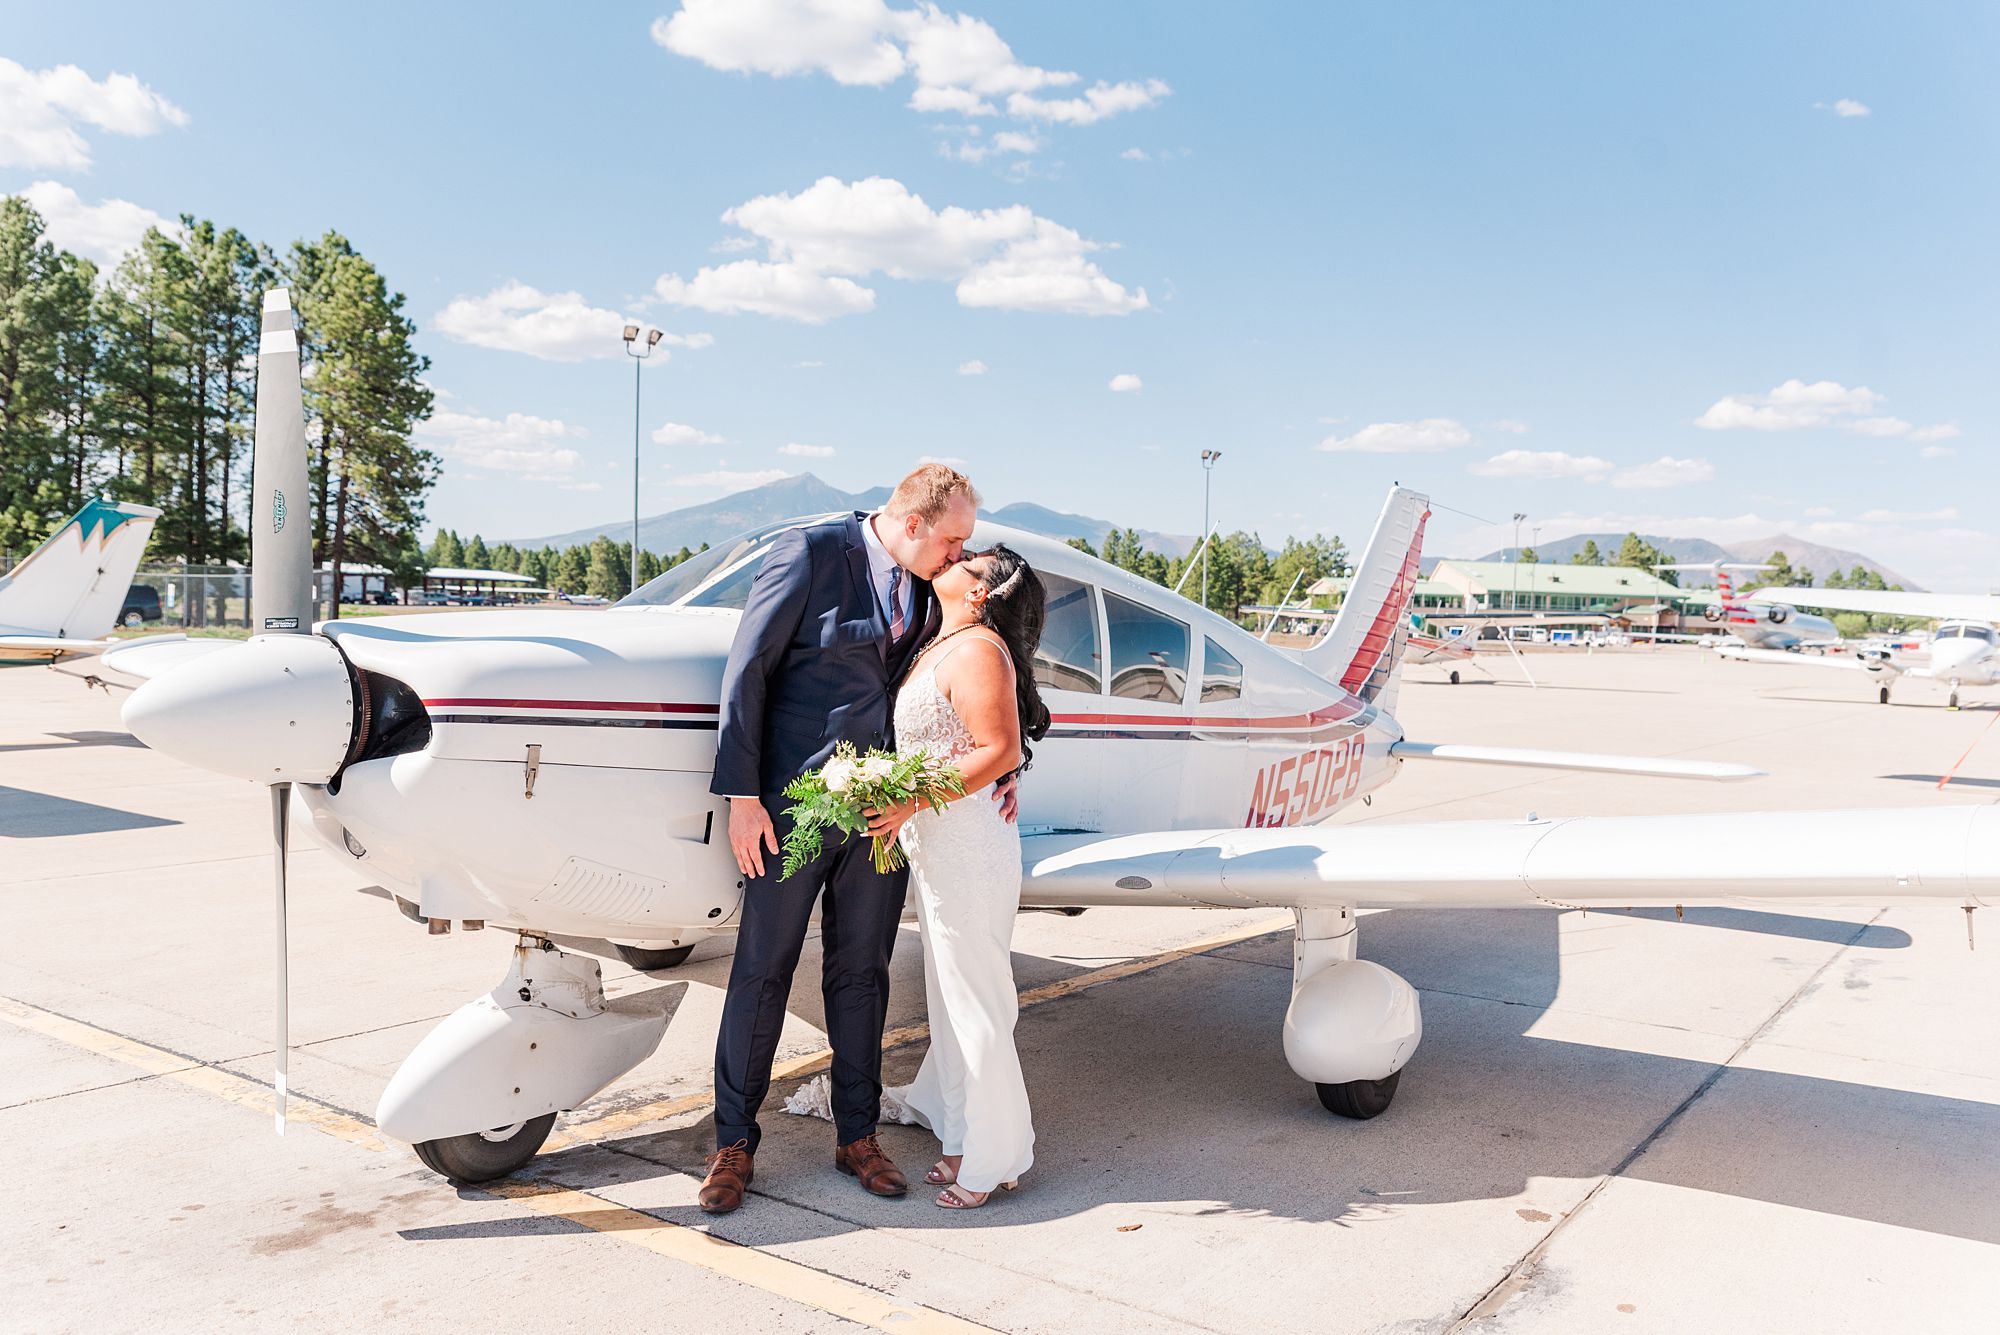 a man and woman kissing in front of an airplane